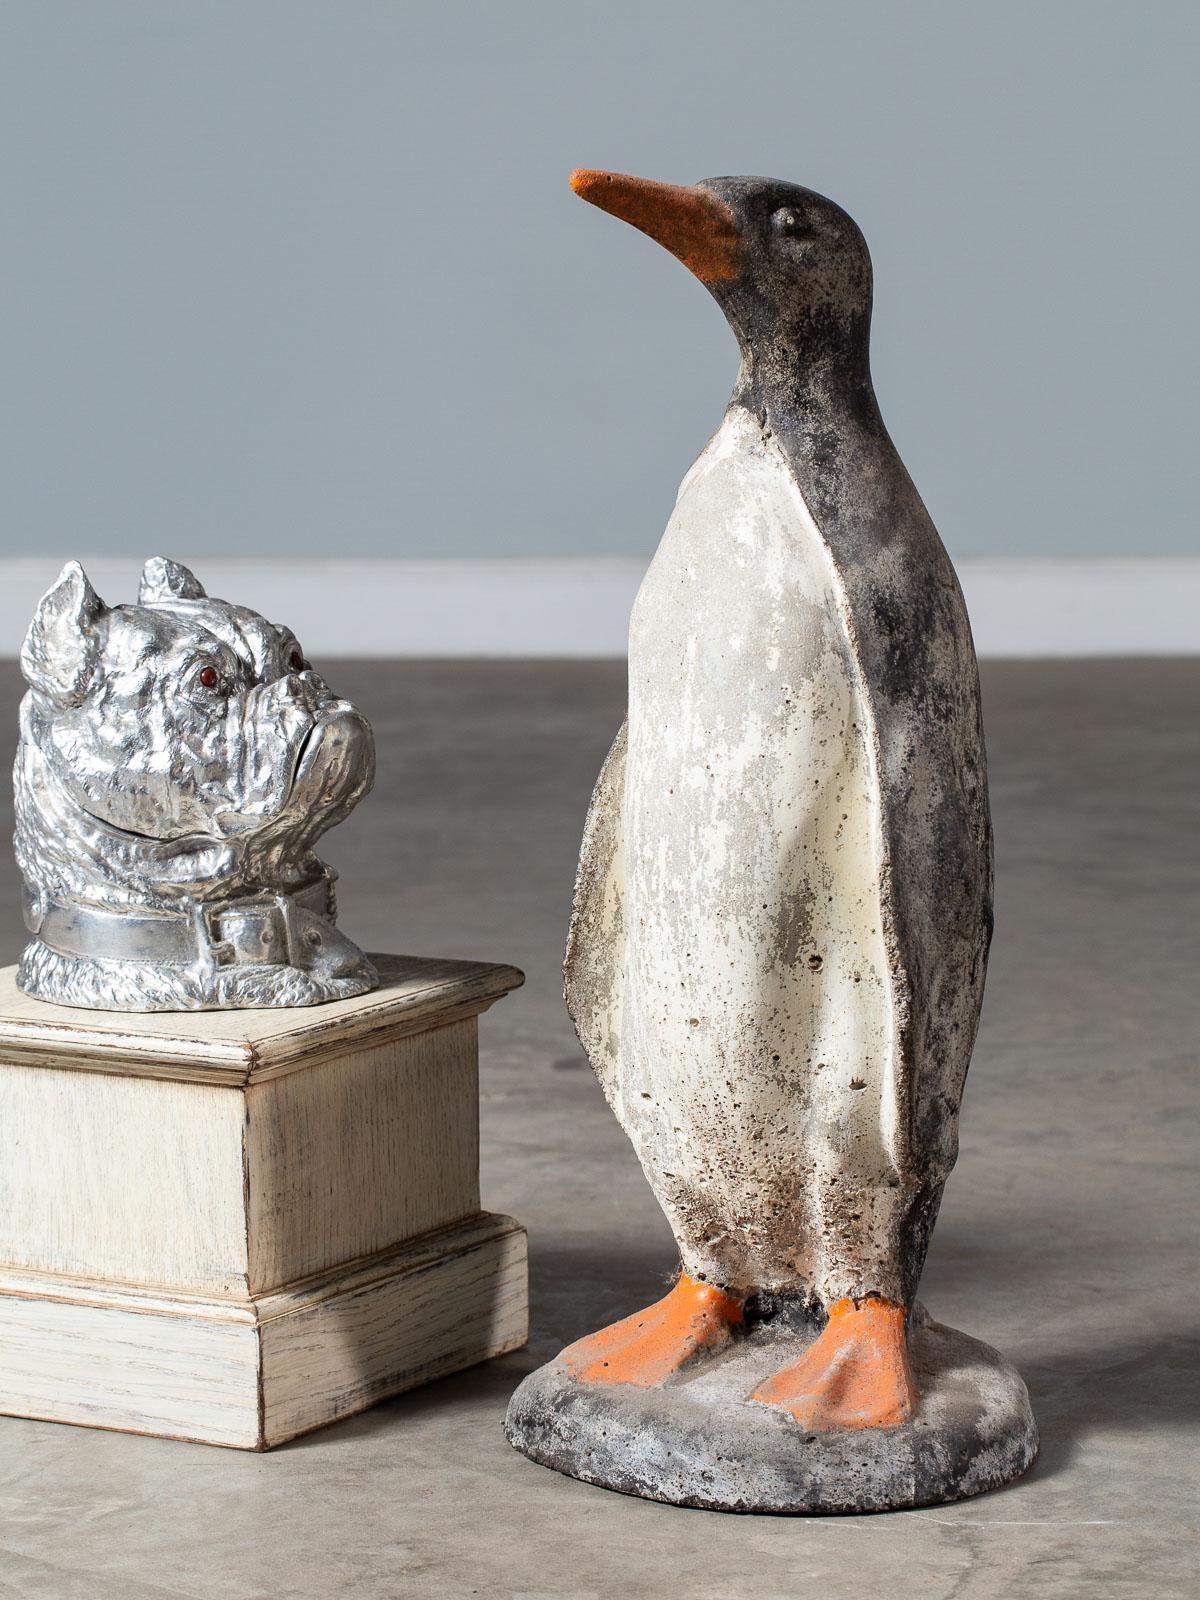 A fantastic vintage French concrete garden penguin circa 1930 standing on a plinth base. Beautifully rendered with life like details this vintage penguin has charm and personality. Sculpted and painted to match a living penguin this fine example is